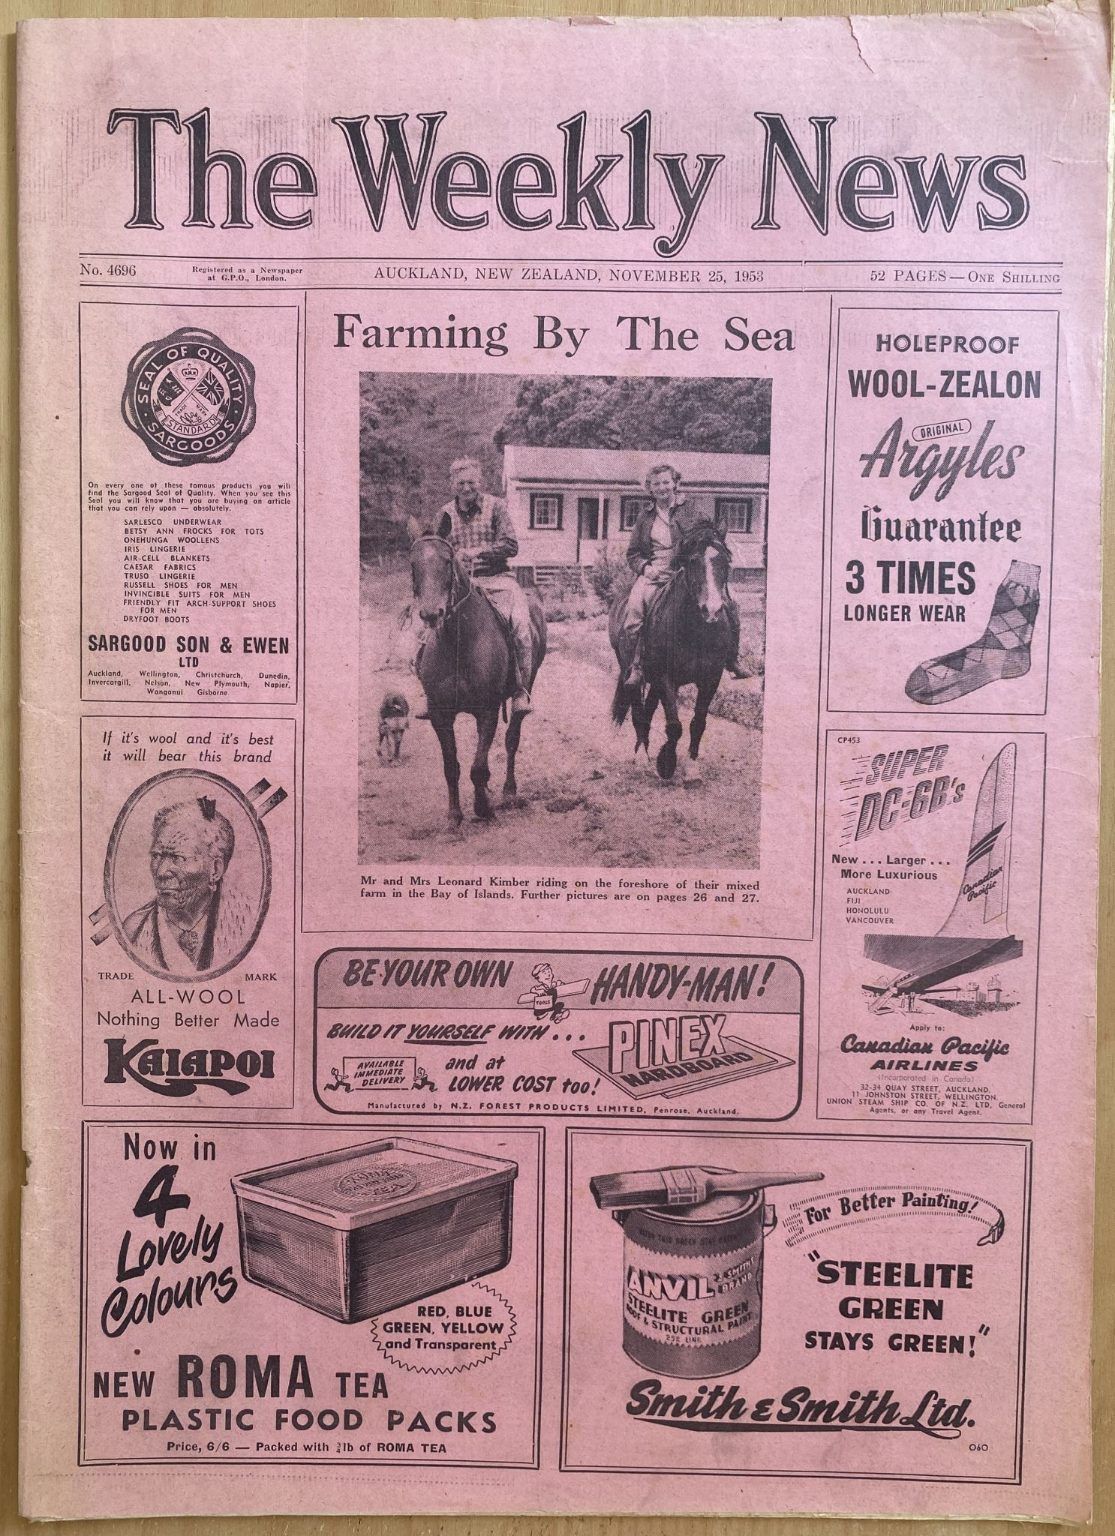 OLD NEWSPAPER: The Weekly News - No. 4696, 25 December 1953